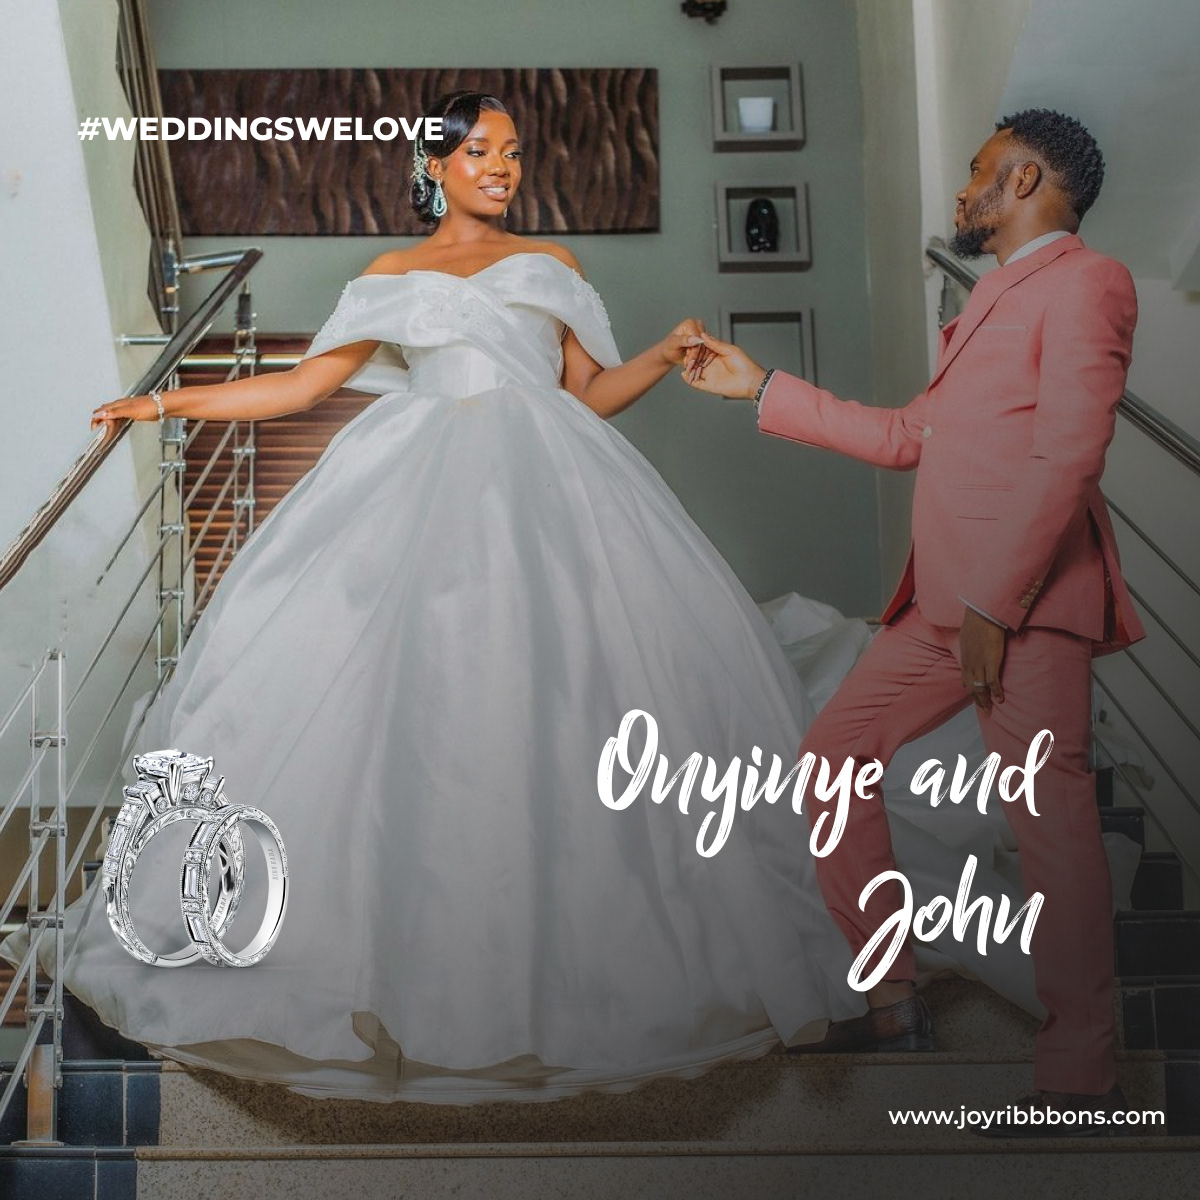 JoyRibbons is the home of all things weddings in Nigeria. We provide an easy-to-use wedding and gift registry
                for about to wed couples. Enjoy some of the Weddings We Love at JoyRibbons with these series